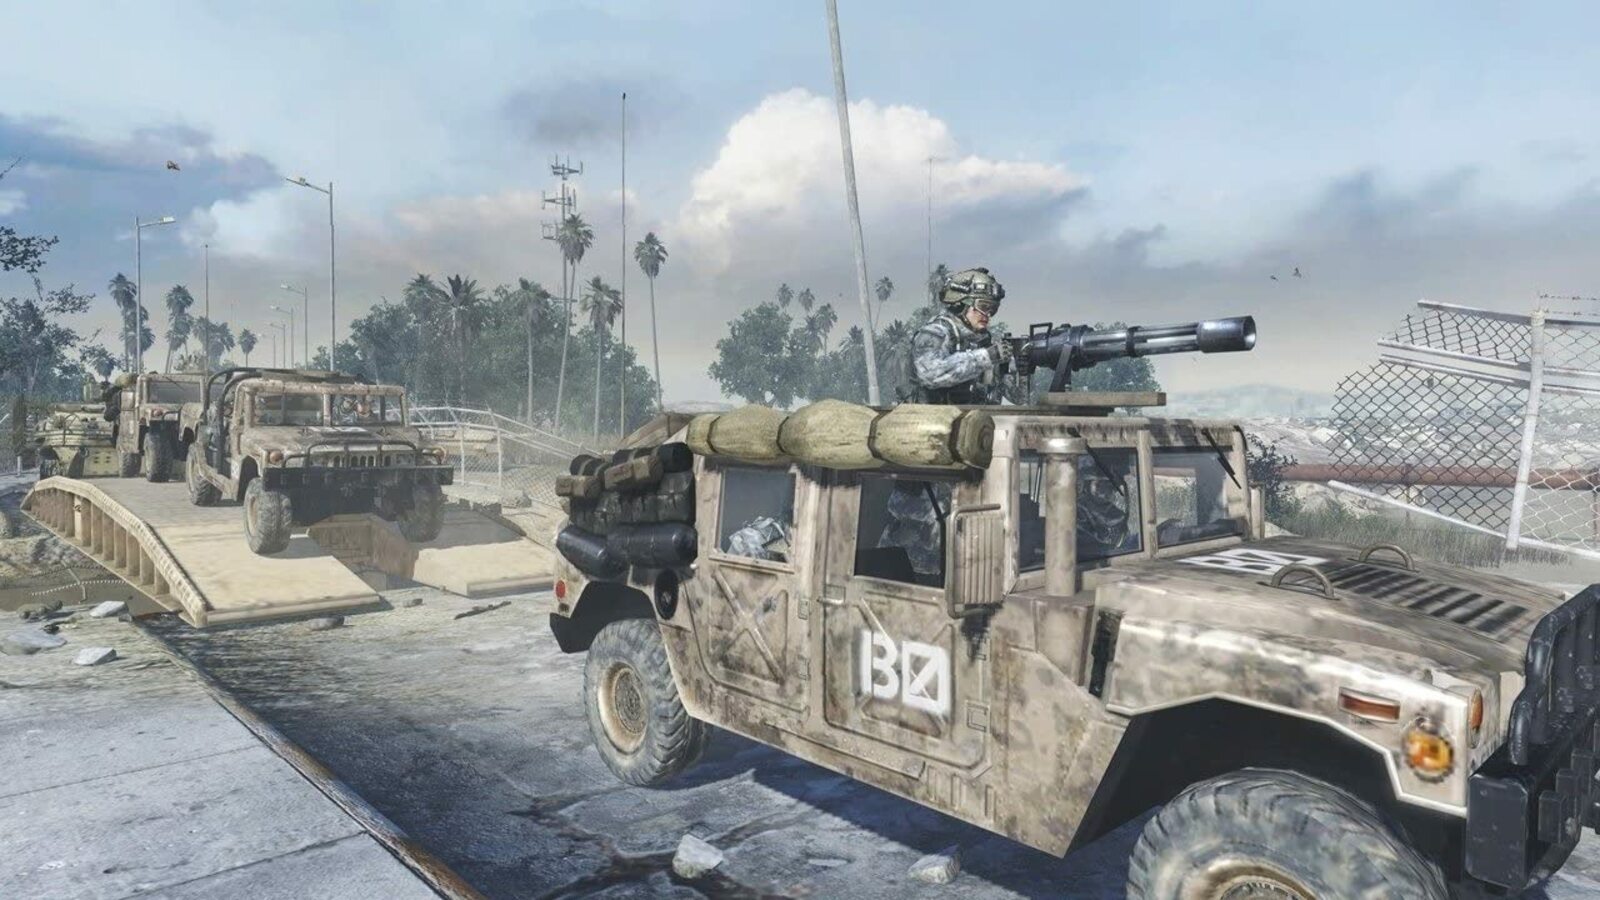 Call Of Duty has won its legal fight over having Humvees. Rock Paper Shotgun